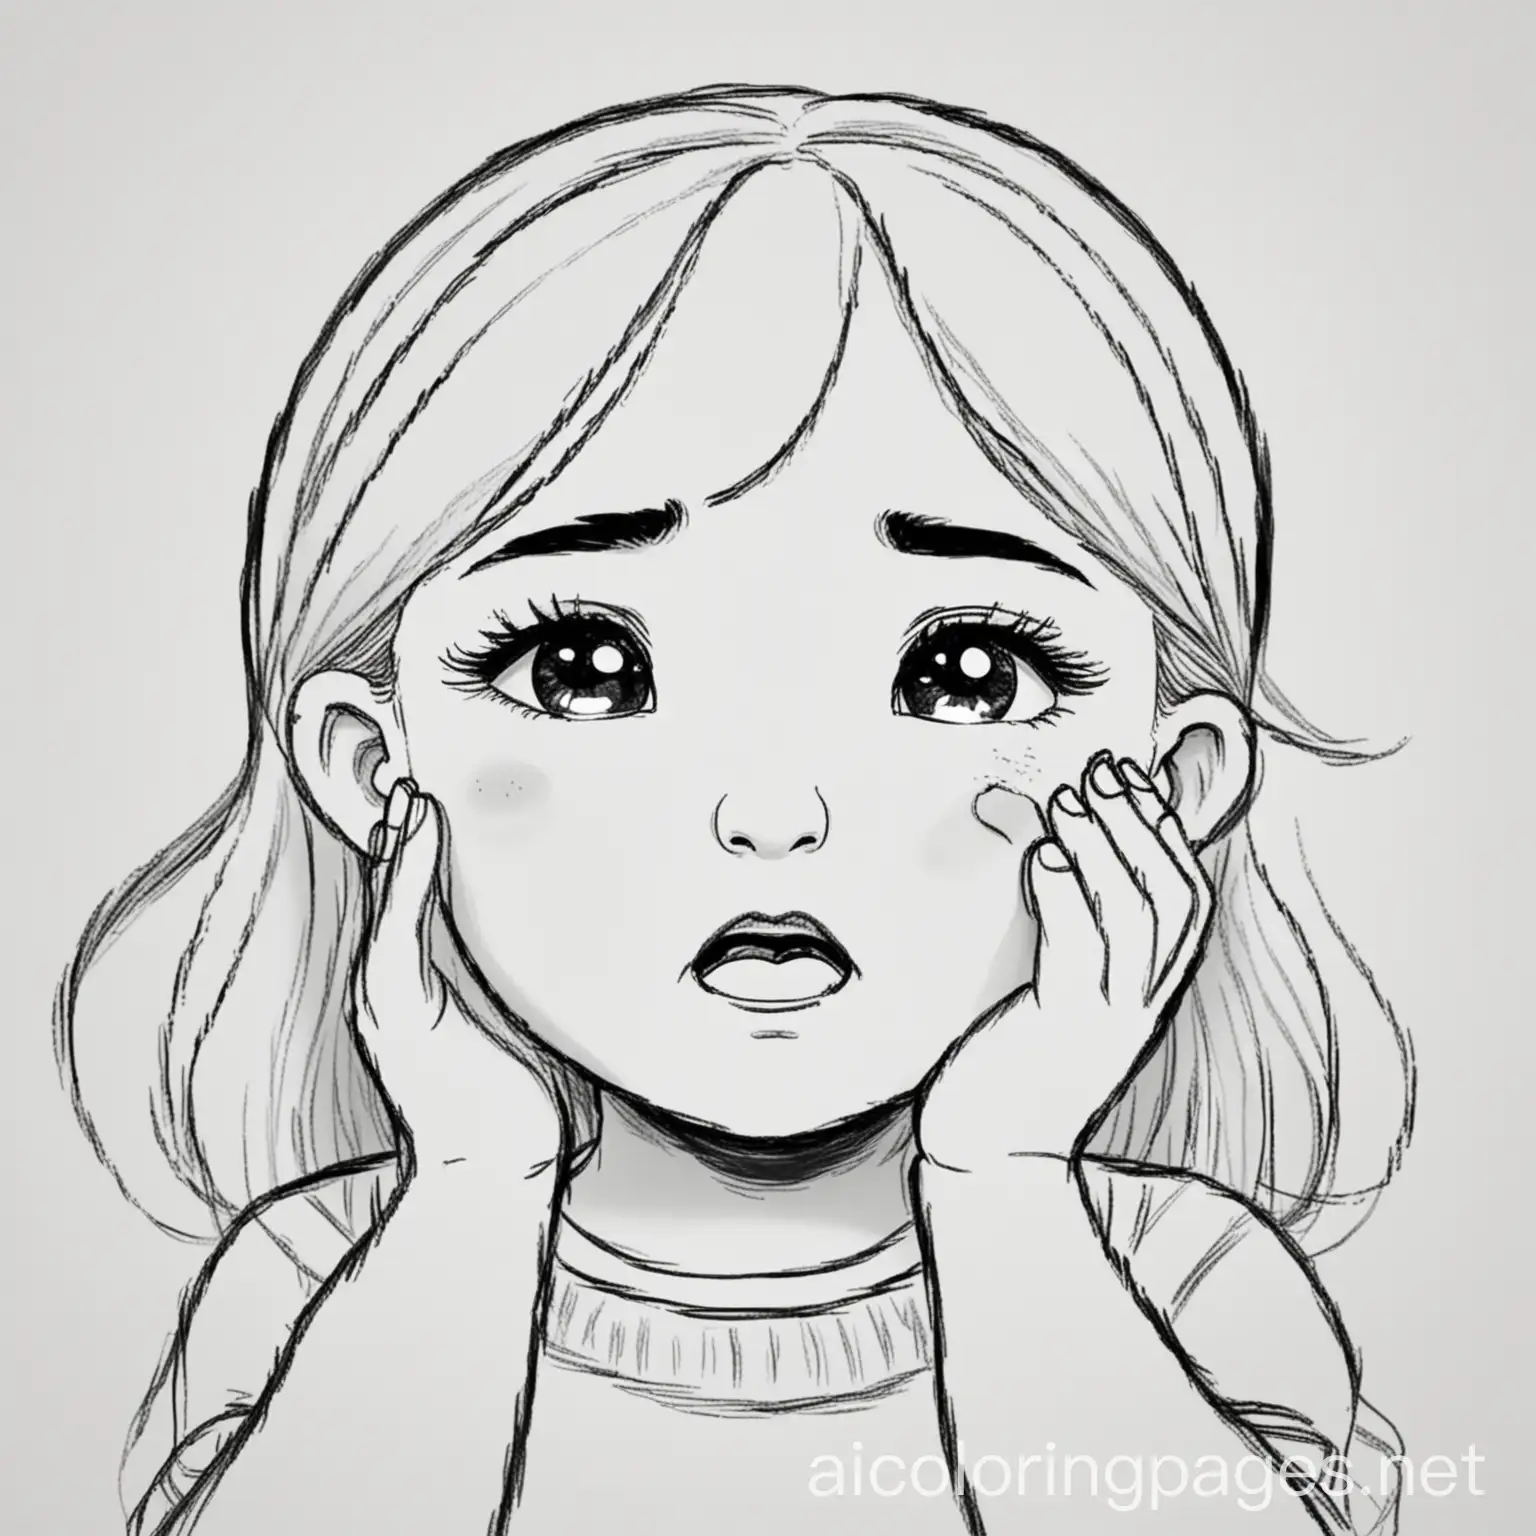 little girl crying, Coloring Page, black and white, line art, white background, Simplicity, Ample White Space. The background of the coloring page is plain white to make it easy for young children to color within the lines. The outlines of all the subjects are easy to distinguish, making it simple for kids to color without too much difficulty